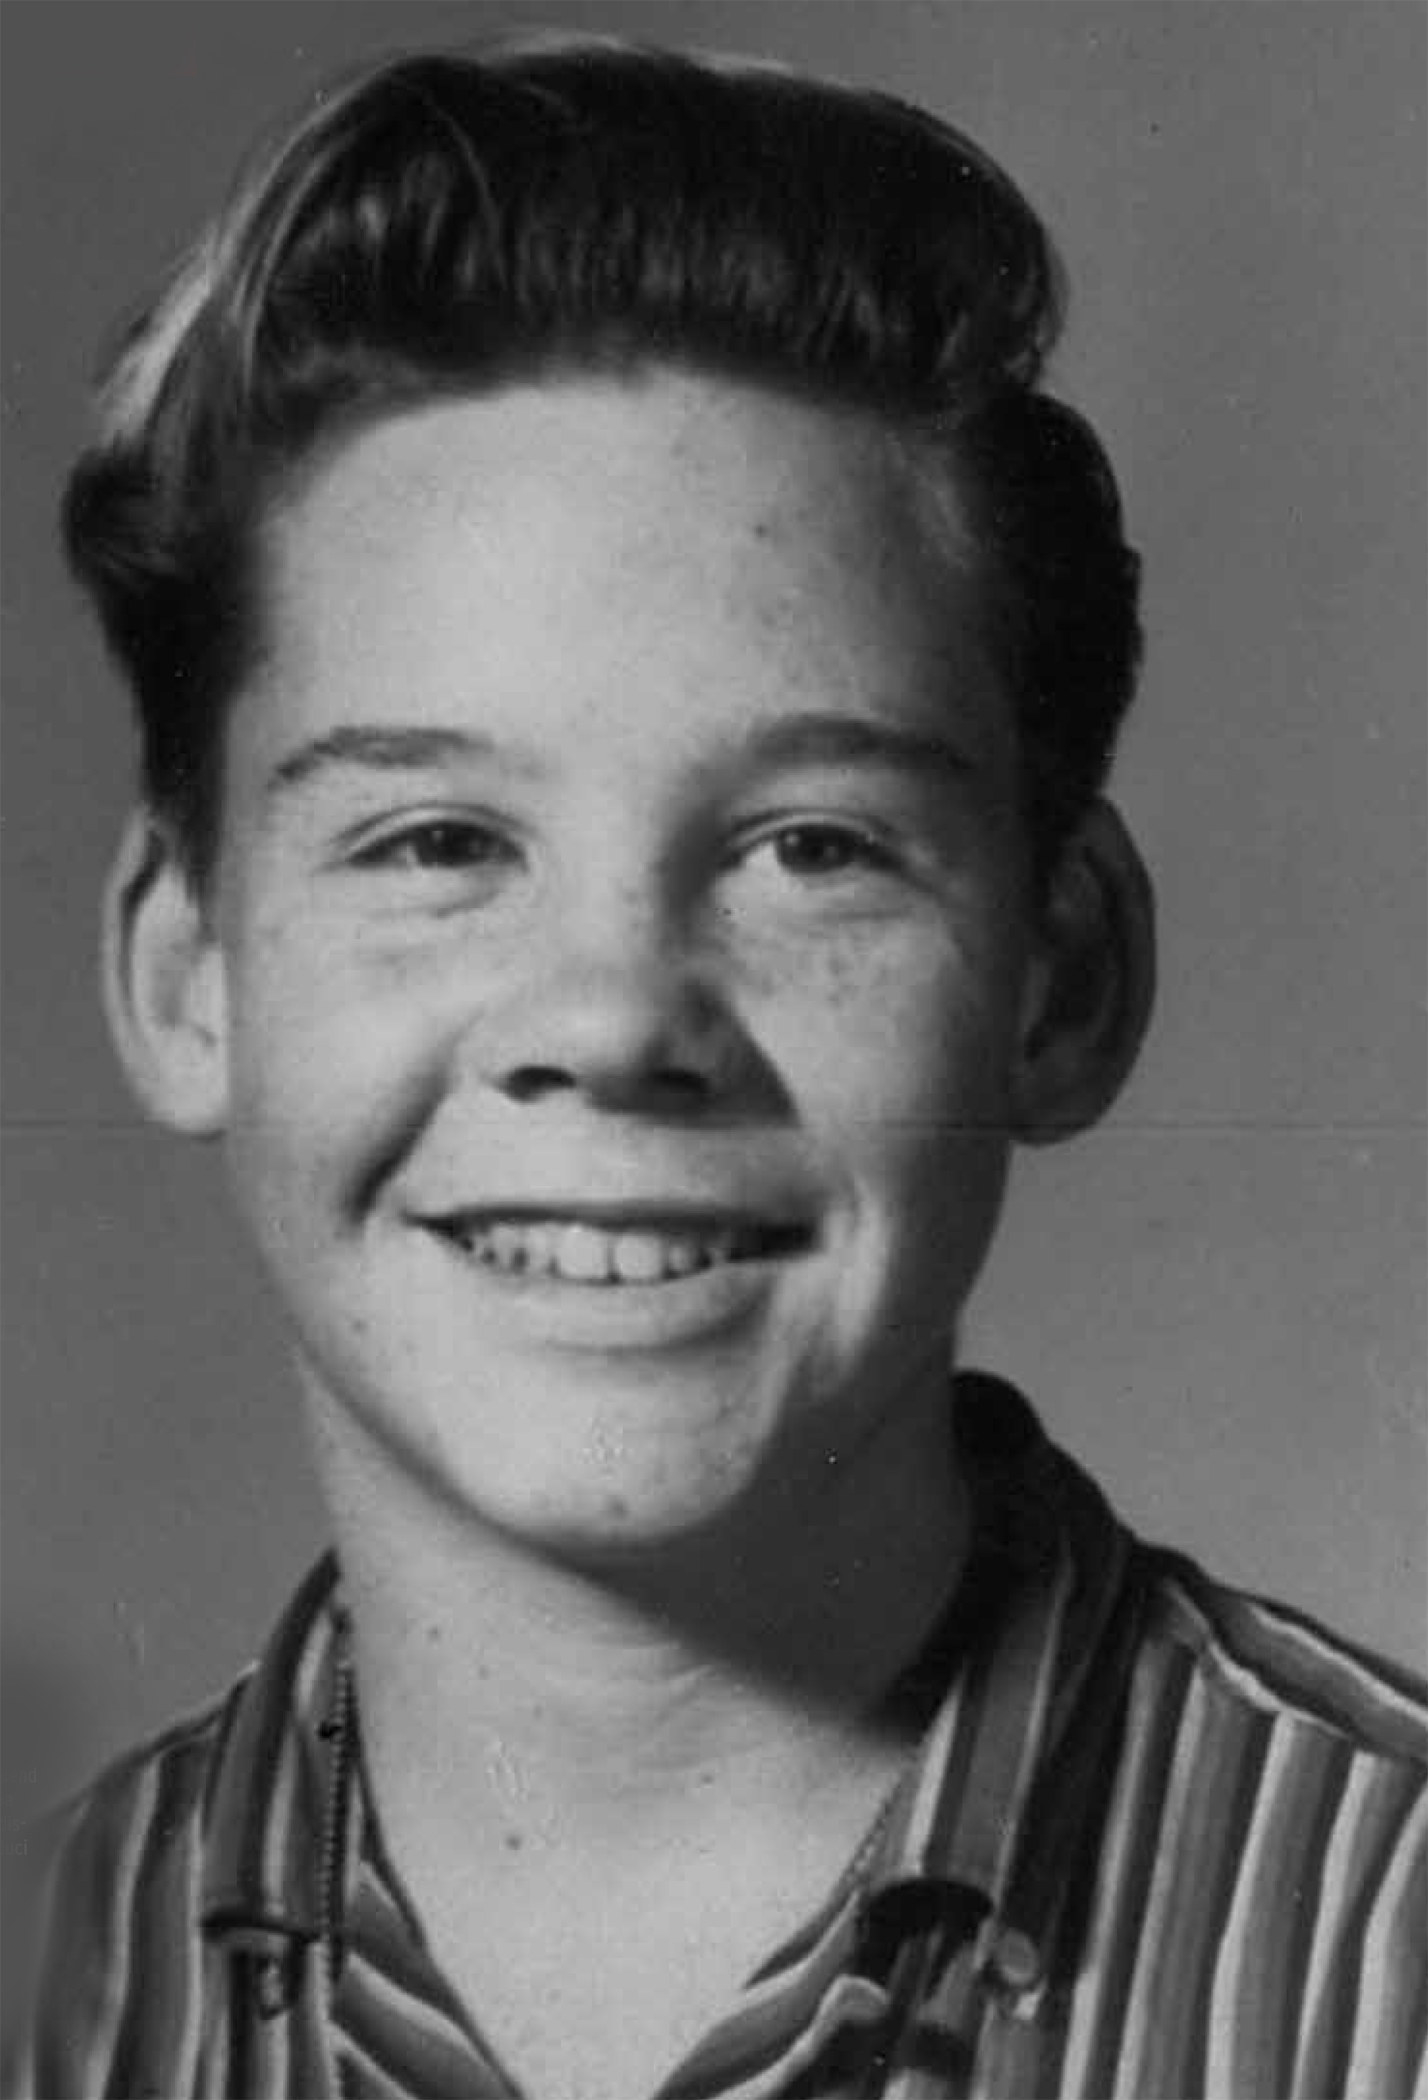 Close-up of a typical smiling kid with freckles from the 1950s